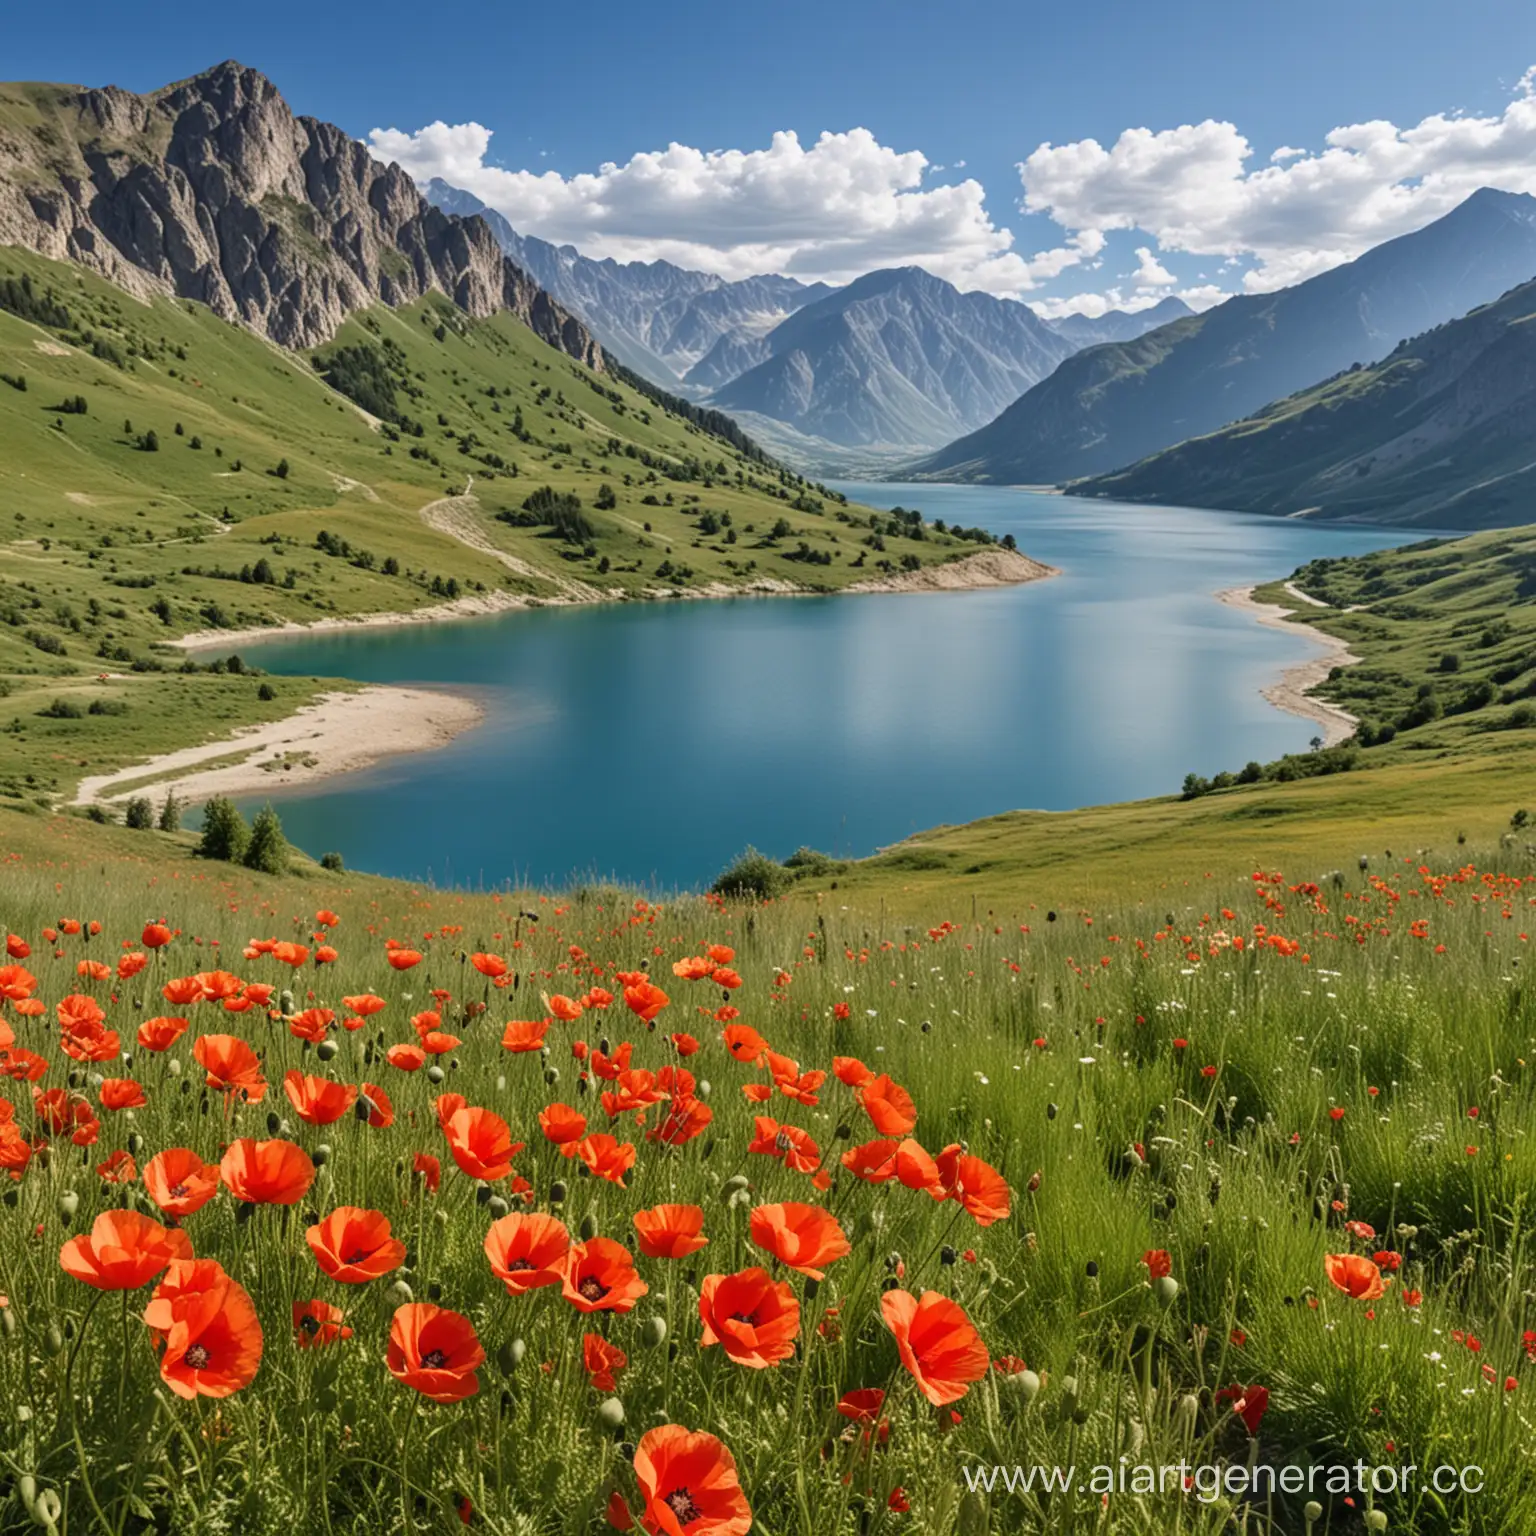 Summer-Mountain-Landscape-with-Red-Poppies-Meadow-and-Lake-View